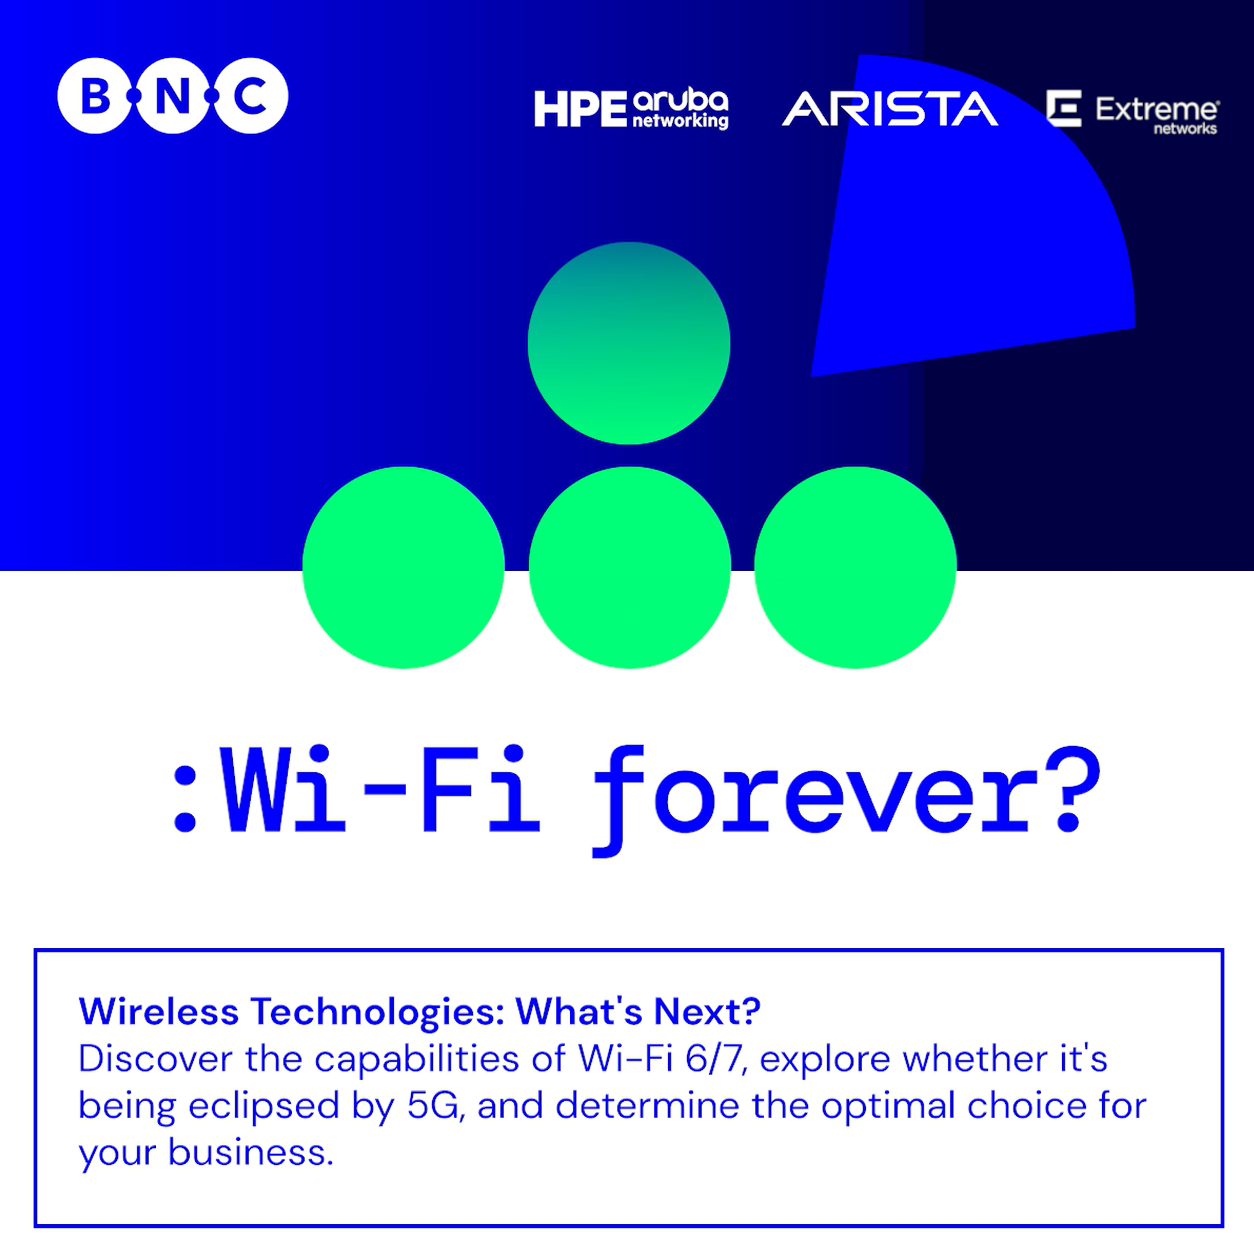 Wi-Fi forever?